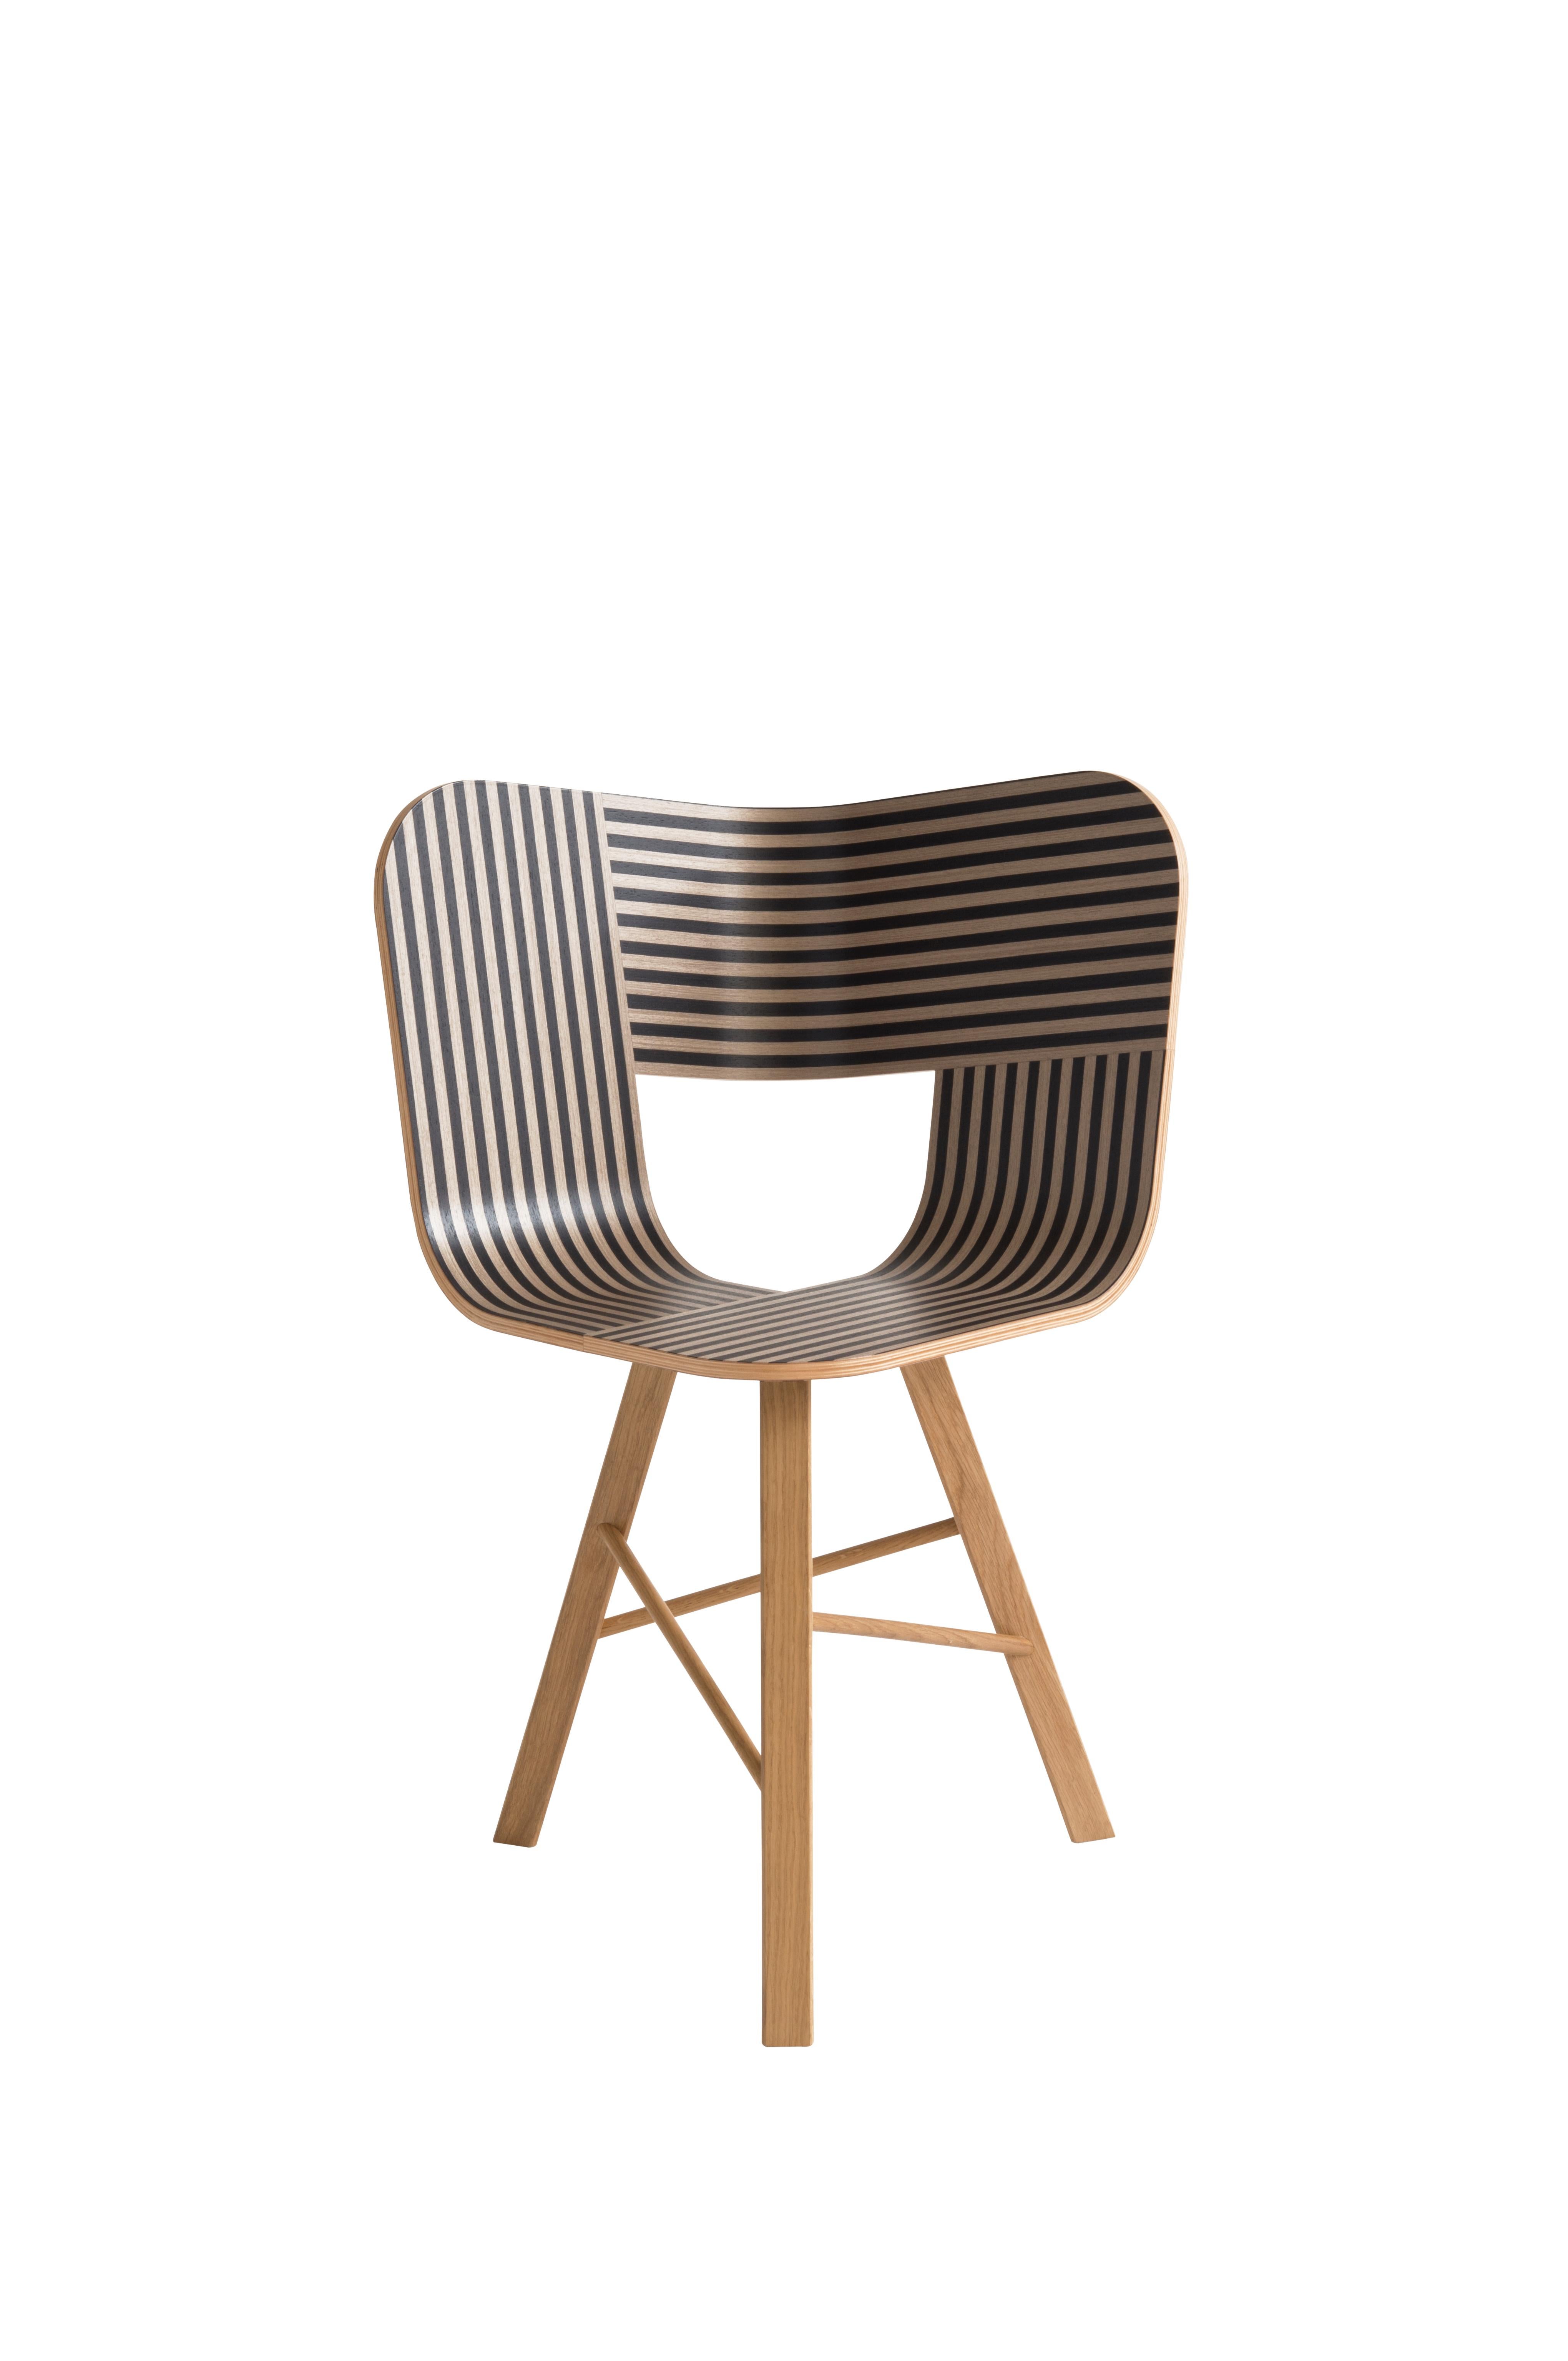 Set of 2,tria wood 3 legs chair, striped seat ivory and black - solid oak wood structure by Colé Italia with Lorenz & Kaz
Dimensions: H 82.5, D 52, W 61 cm
Materials: Plywood chair; 3 legs solid oak base

Also Available: Tria; 4 Legs, with